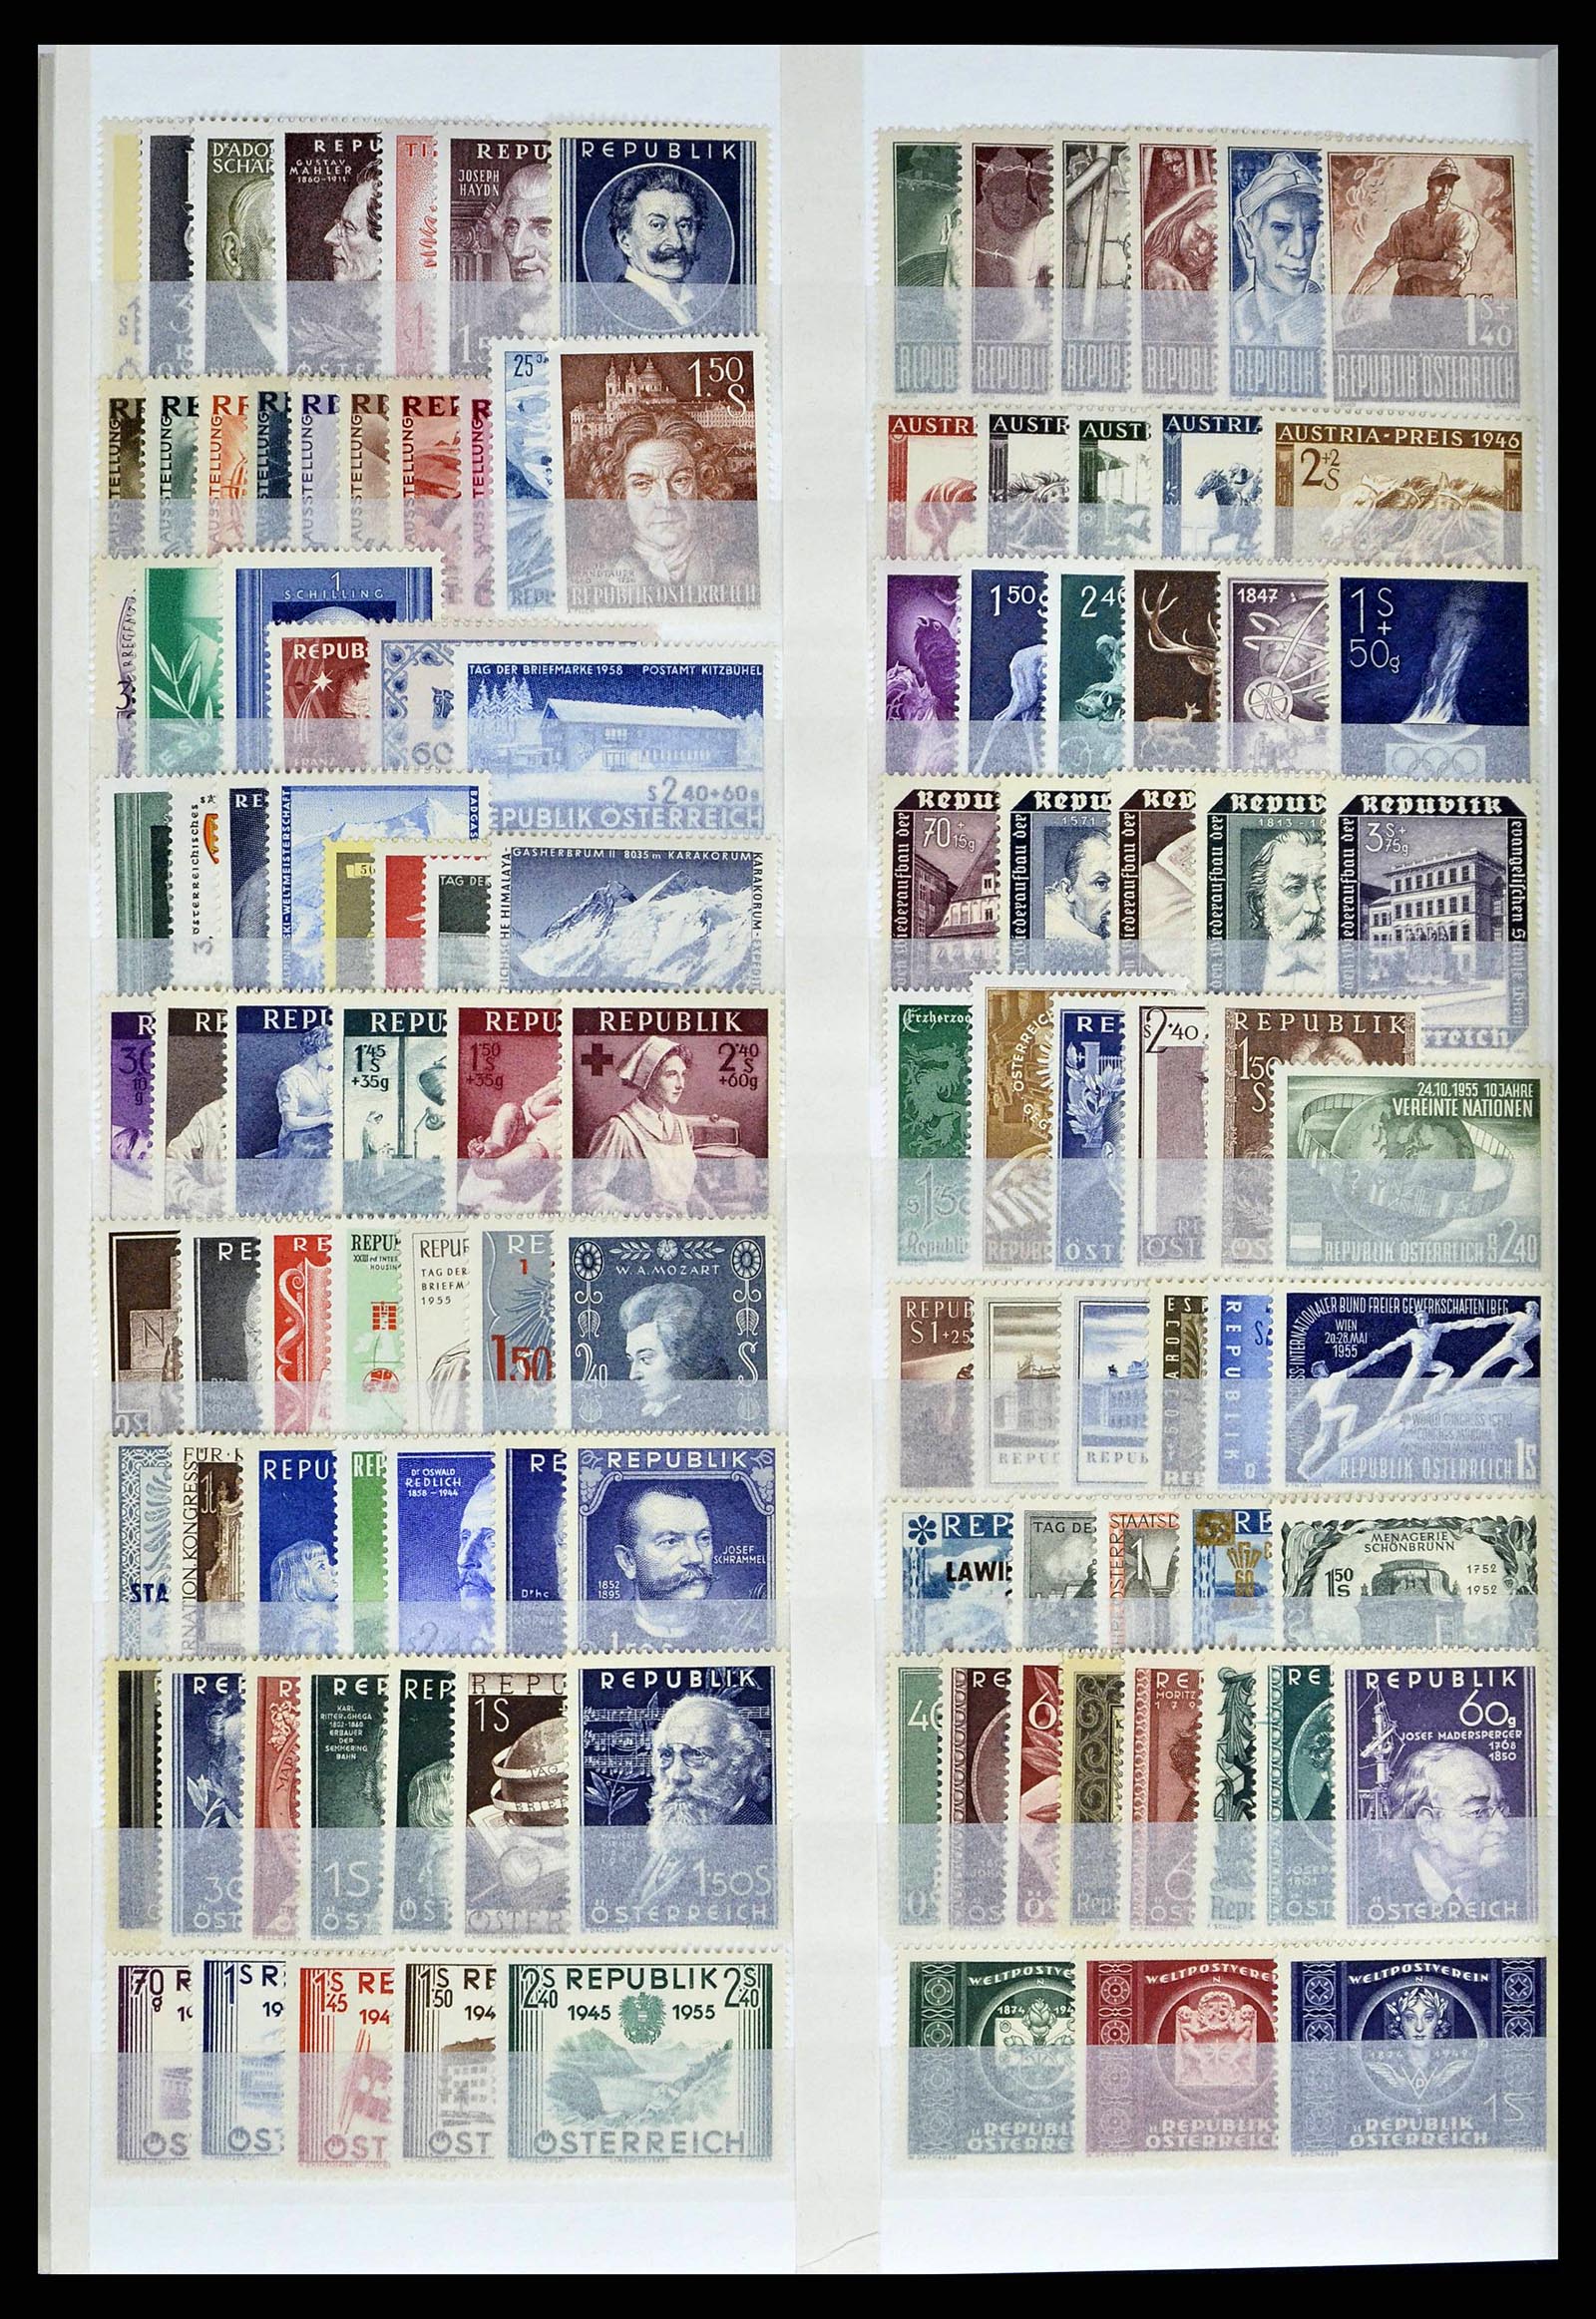 38720 0038 - Stamp collection 38720 European countries.